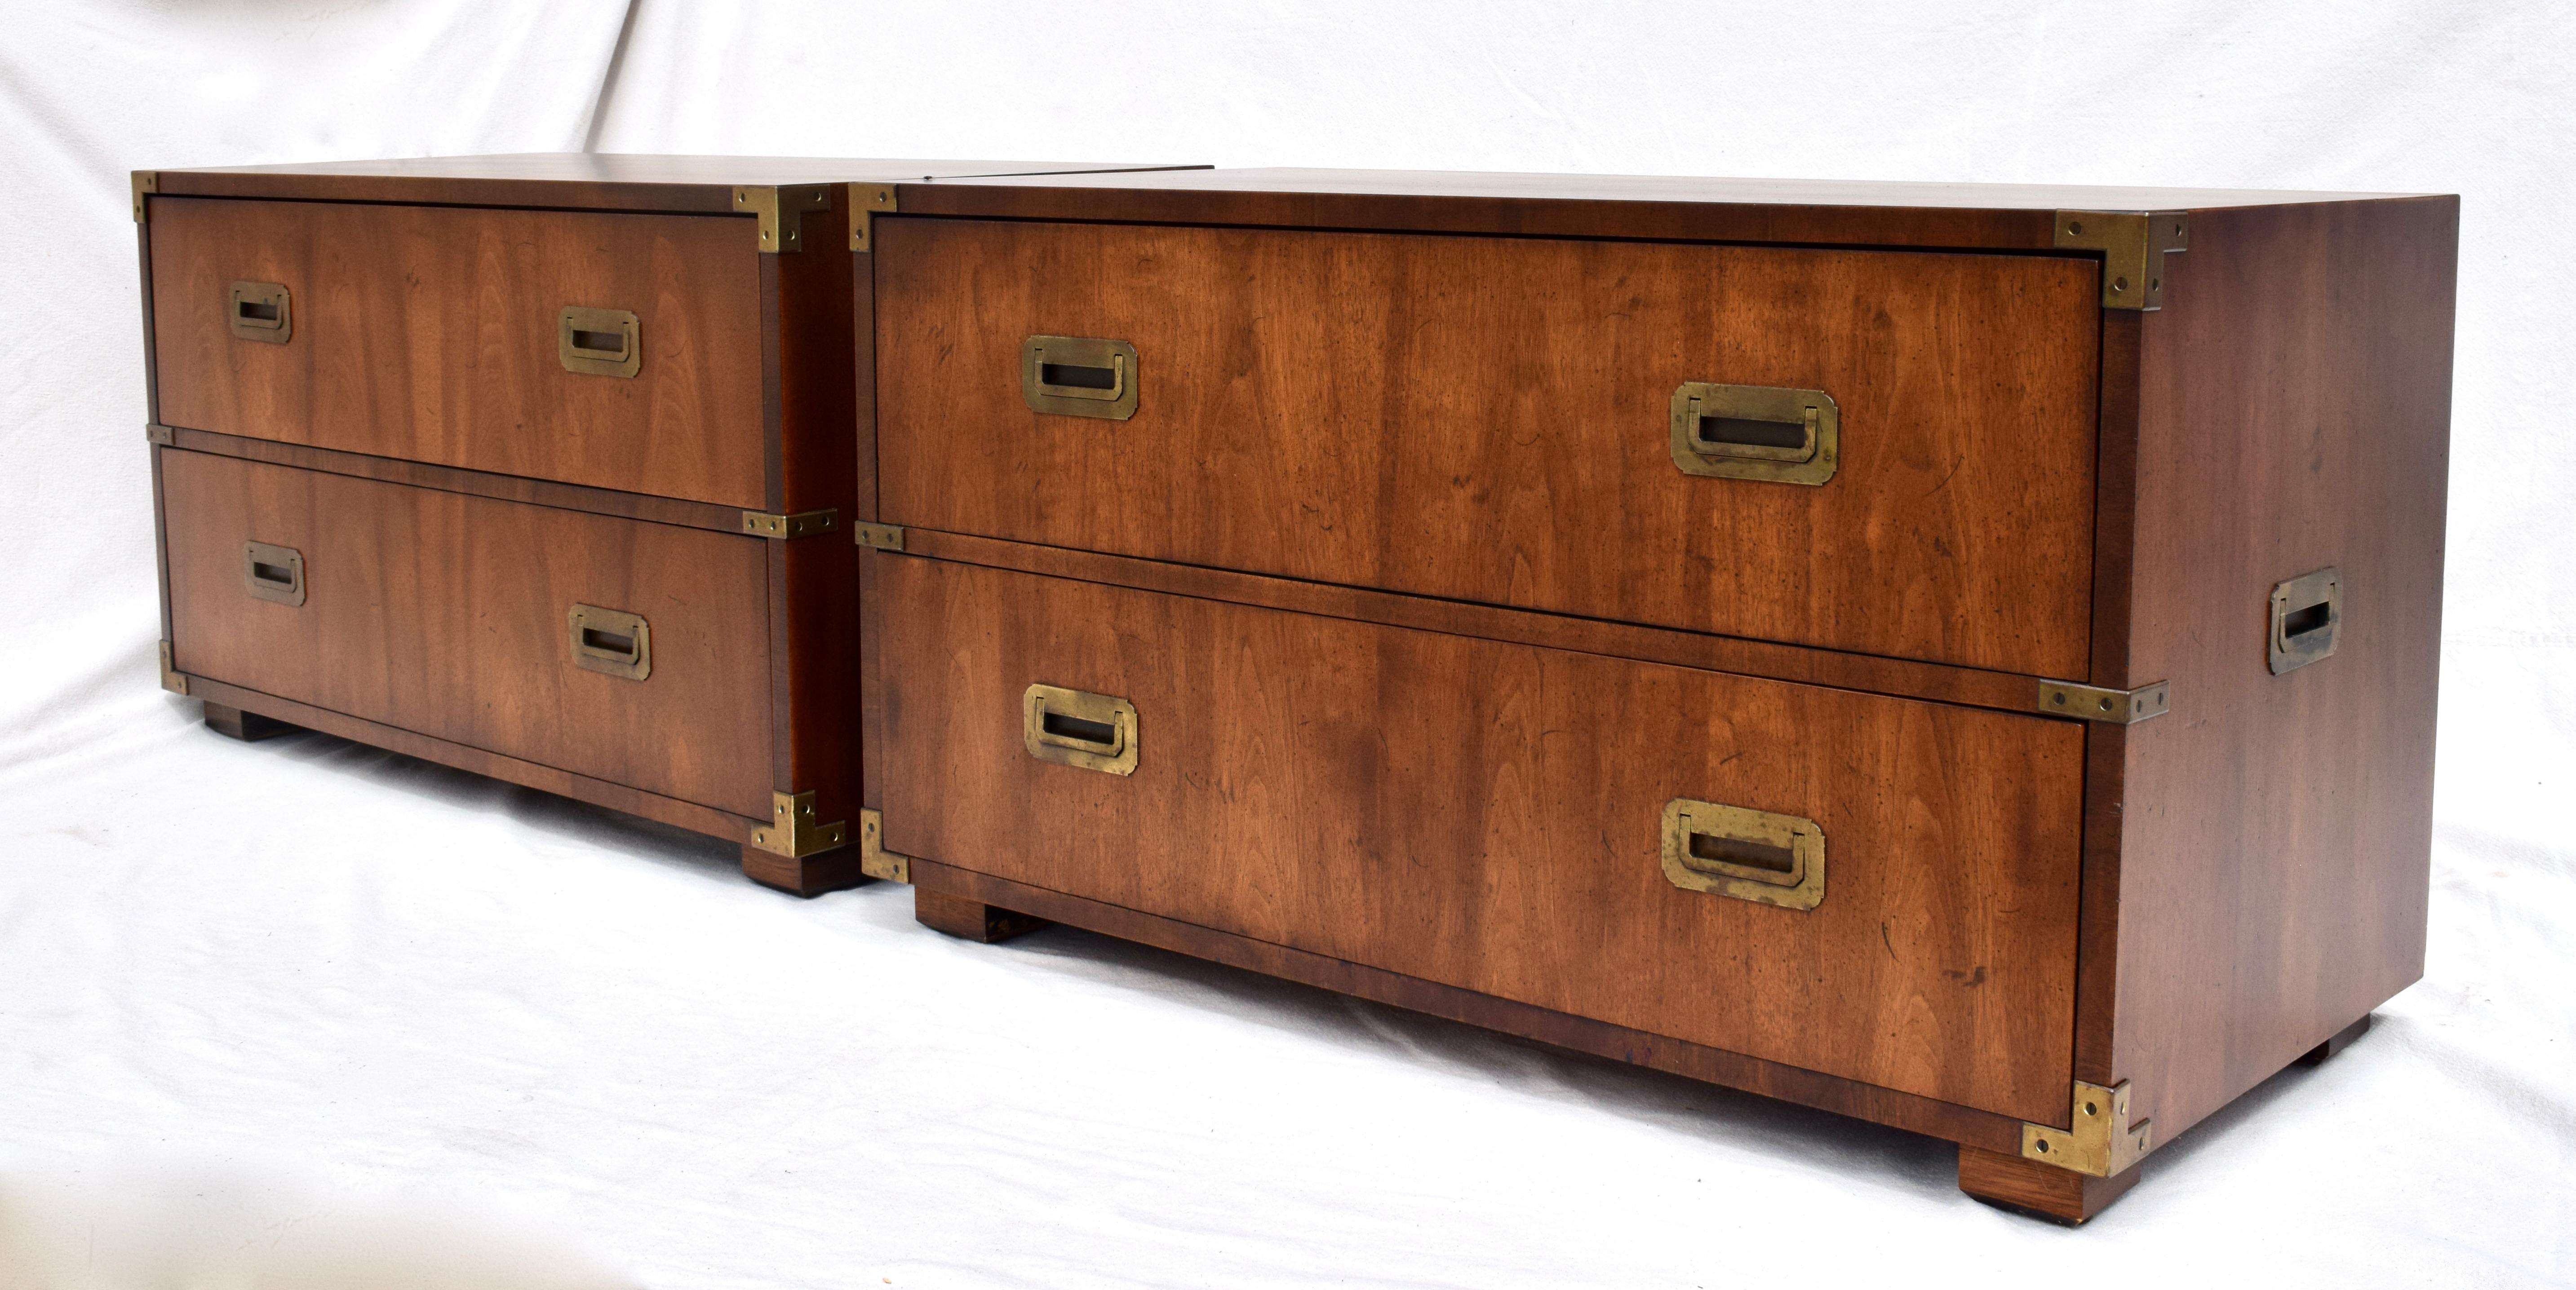 Pair of Henredon flame Mahogany Campaign chests each having two spacious drawers complete with removable drawer inserts. Aesthetic, functional symmetry suitable for placement in a variety of settings.